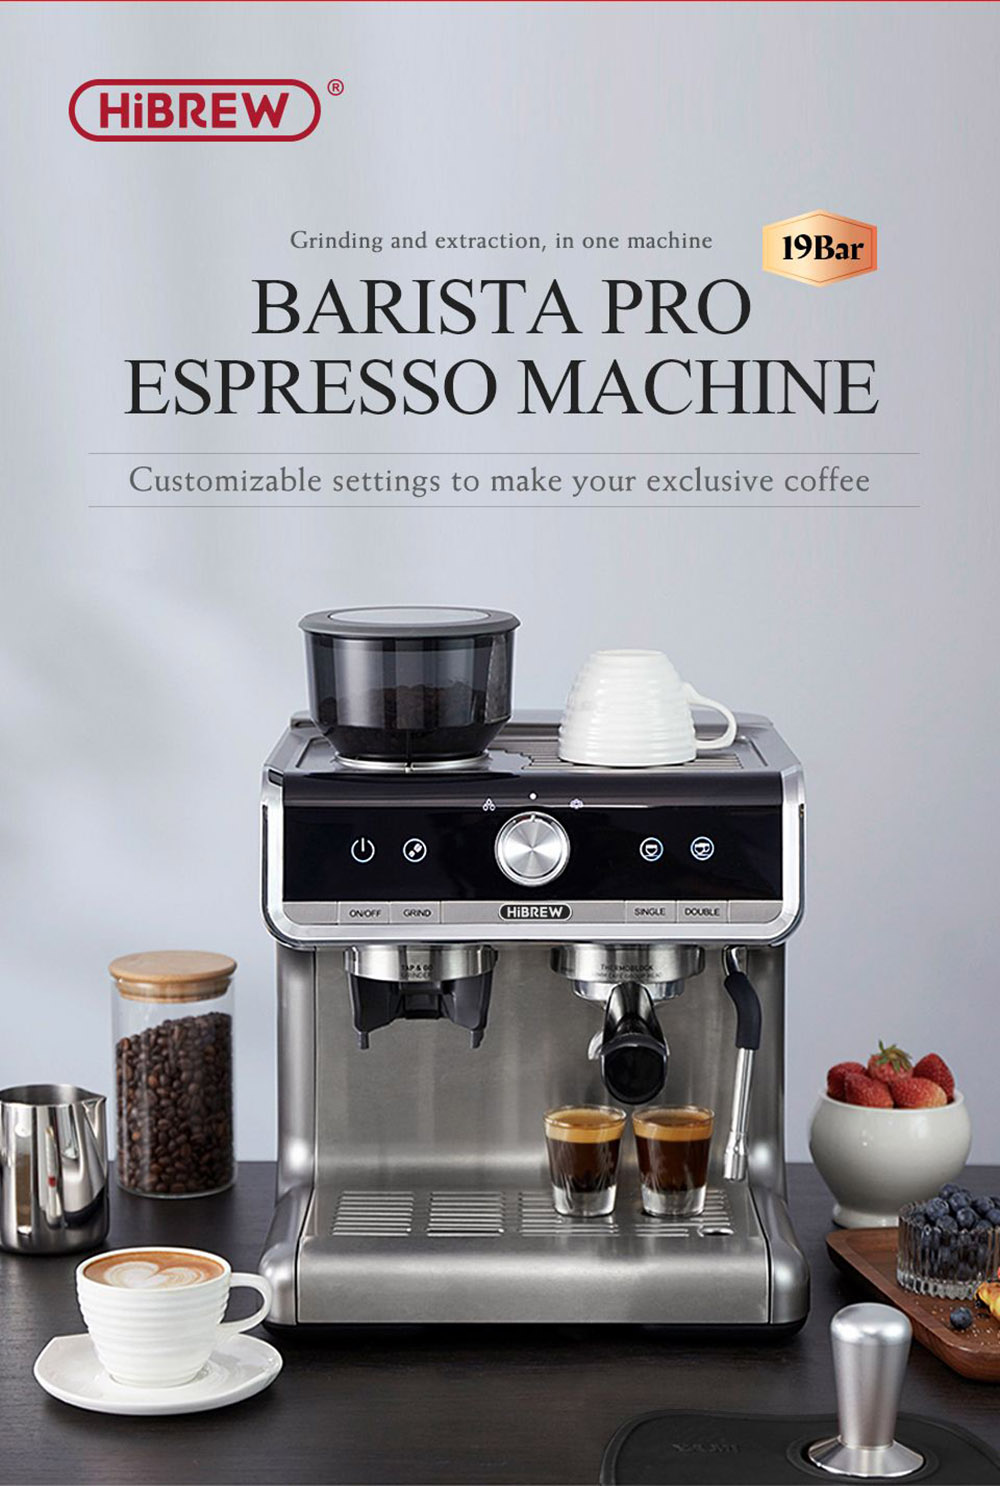 427€ with Coupon for HiBREW H7 1550W Coffee Machine, 19Bar 2.8L Water - EU 🇪🇺 - GEEKBUYING